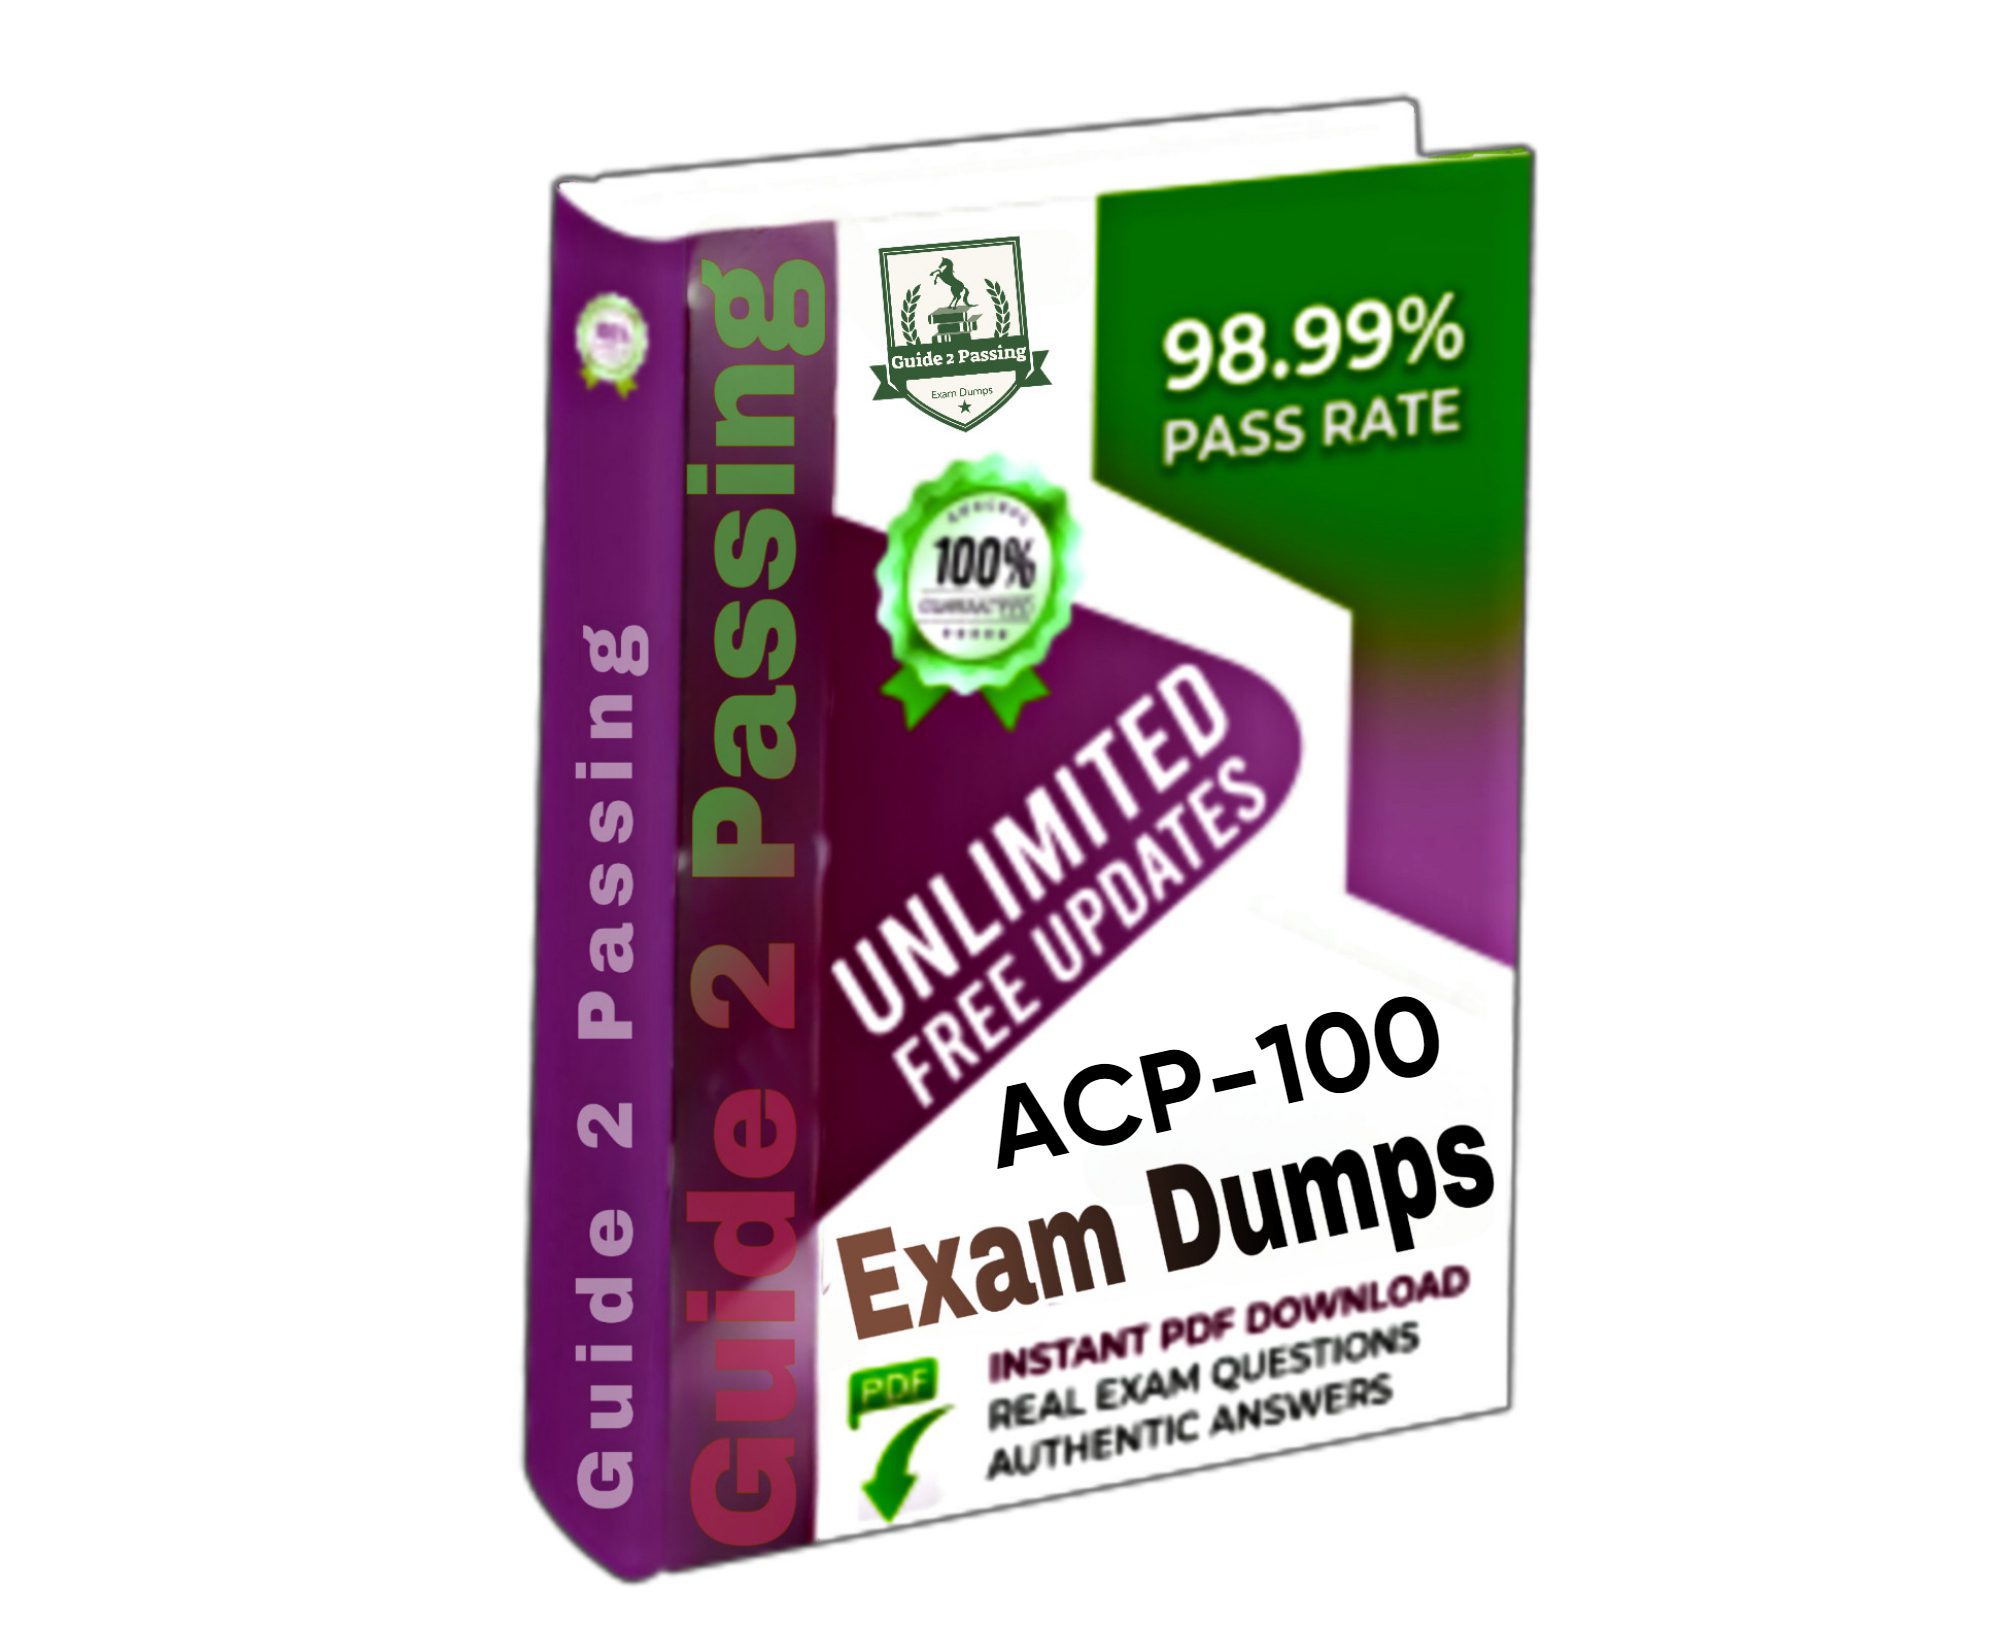 Pass Your Atlassian ACP-100 Exam Dumps From Guide 2 Passing